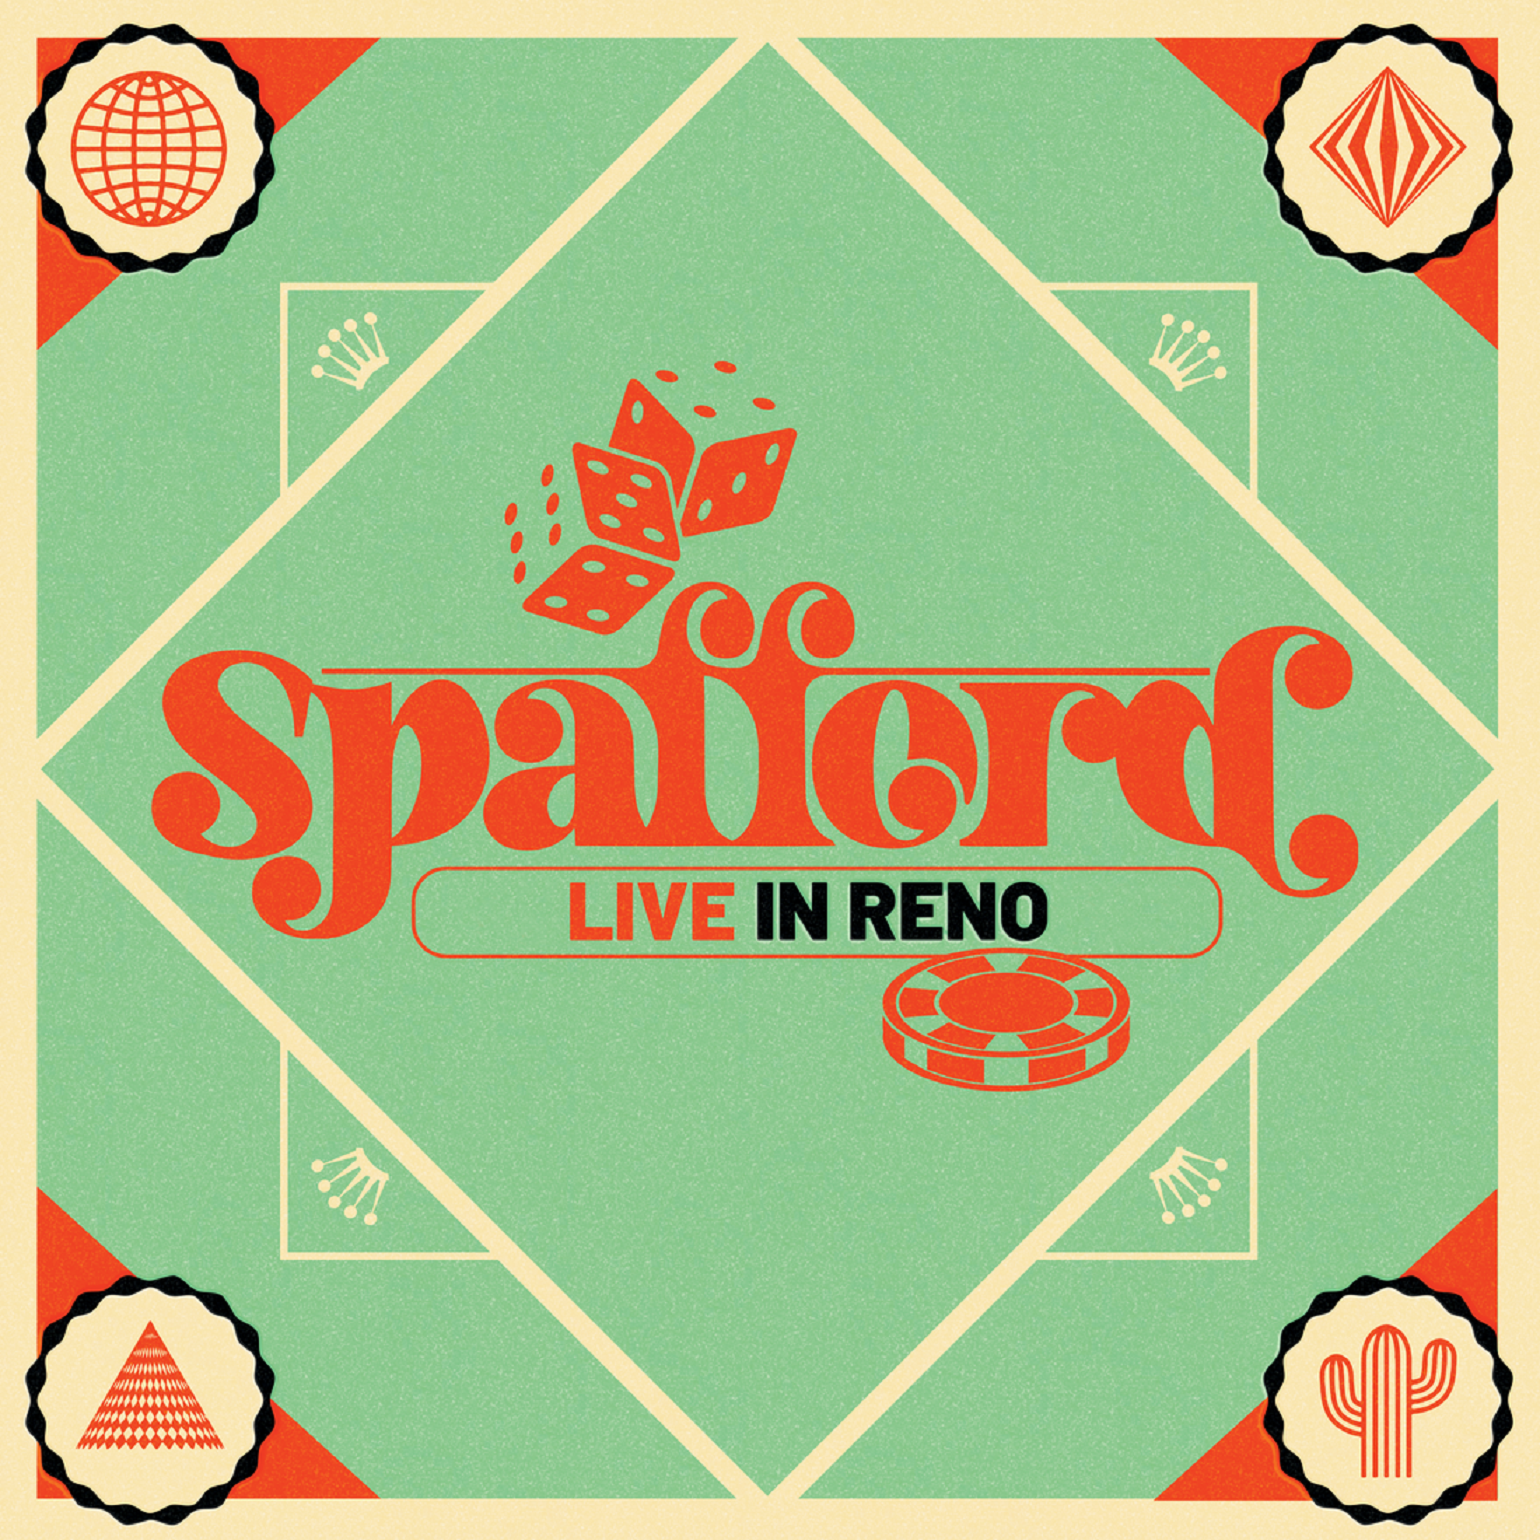 Spafford Releases "Live in Reno" Ahead of Fall Tour